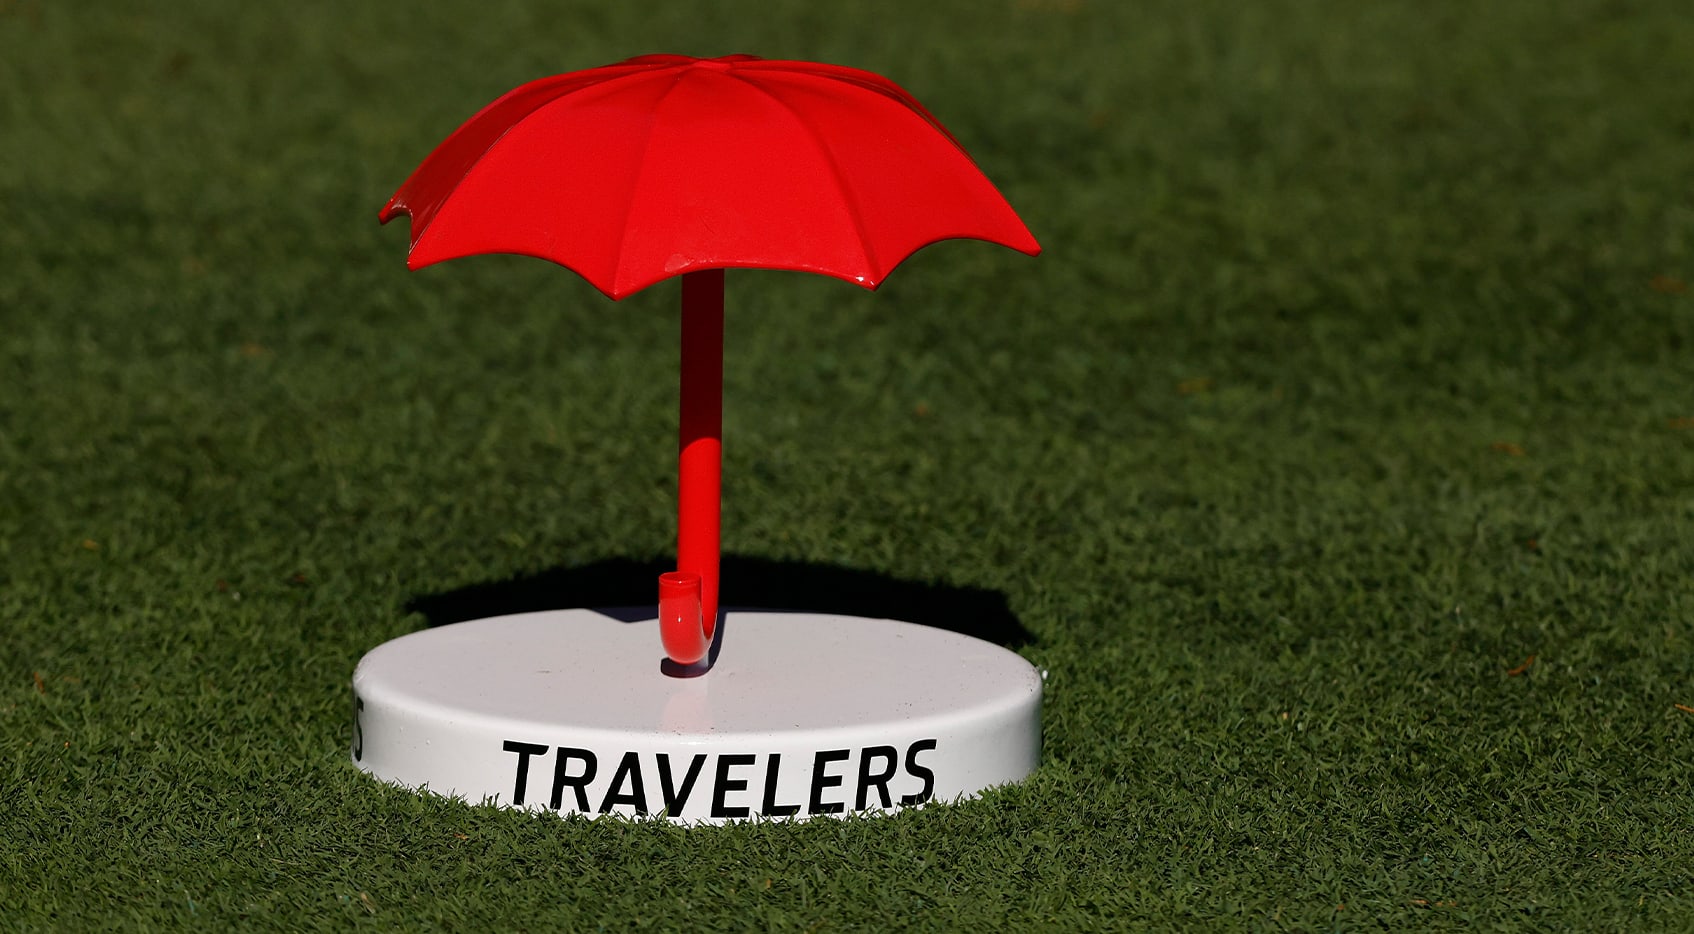 How to watch the Travelers Championship, Round 3 Featured Groups, live scores, tee times, TV times